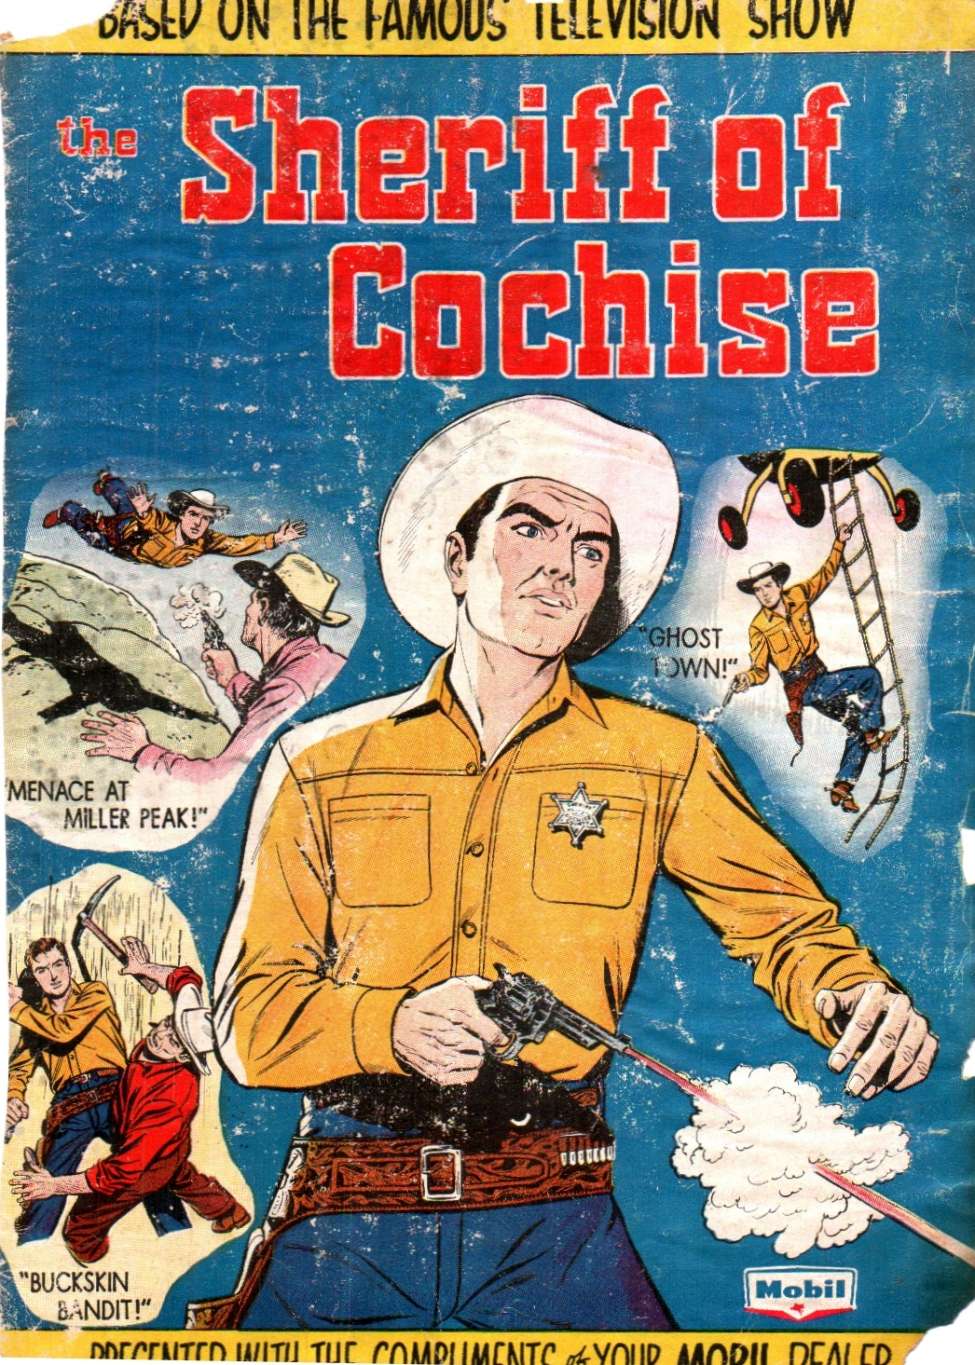 Comic Book Cover For Sheriff of Coshise